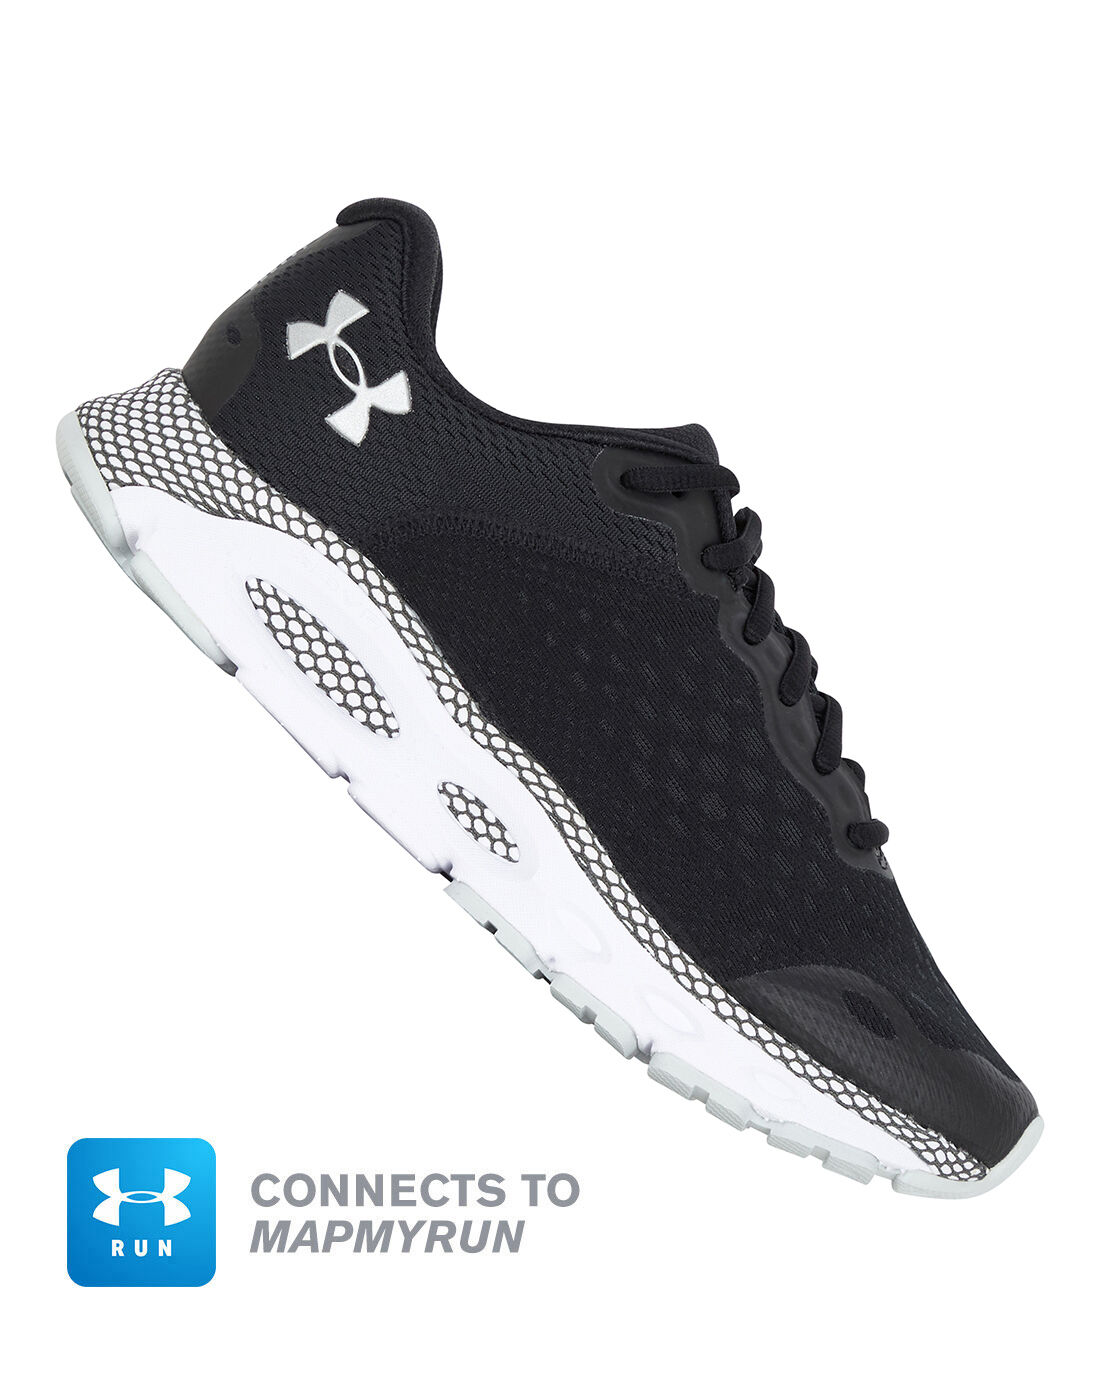 navy blue under armour shoes women's